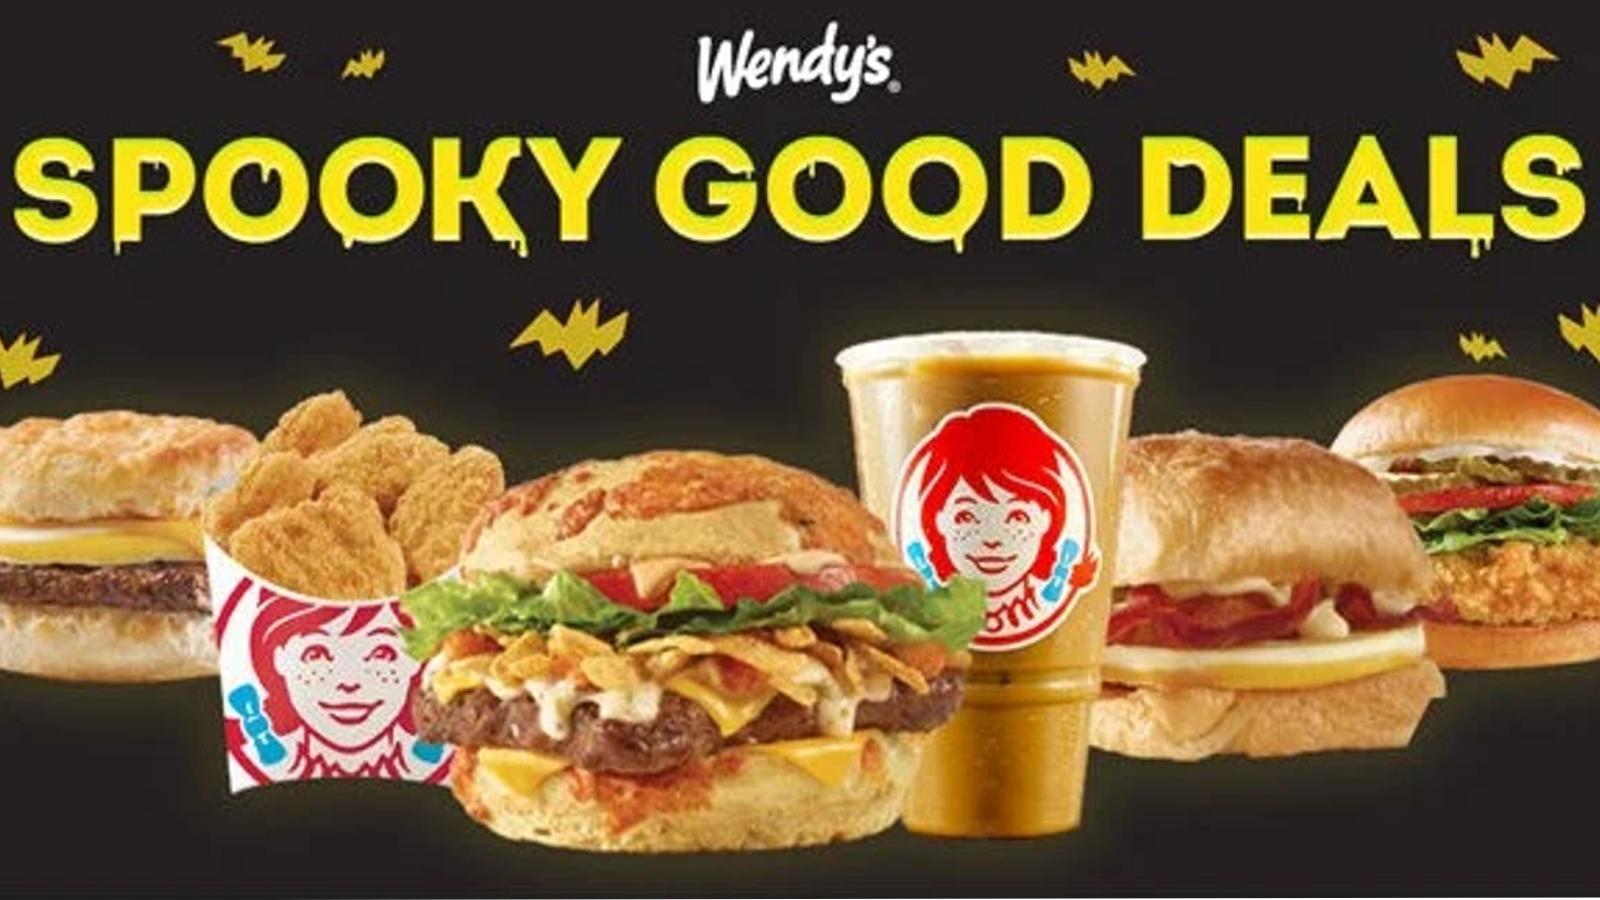 Image features some of the free food items offered by Wendy's